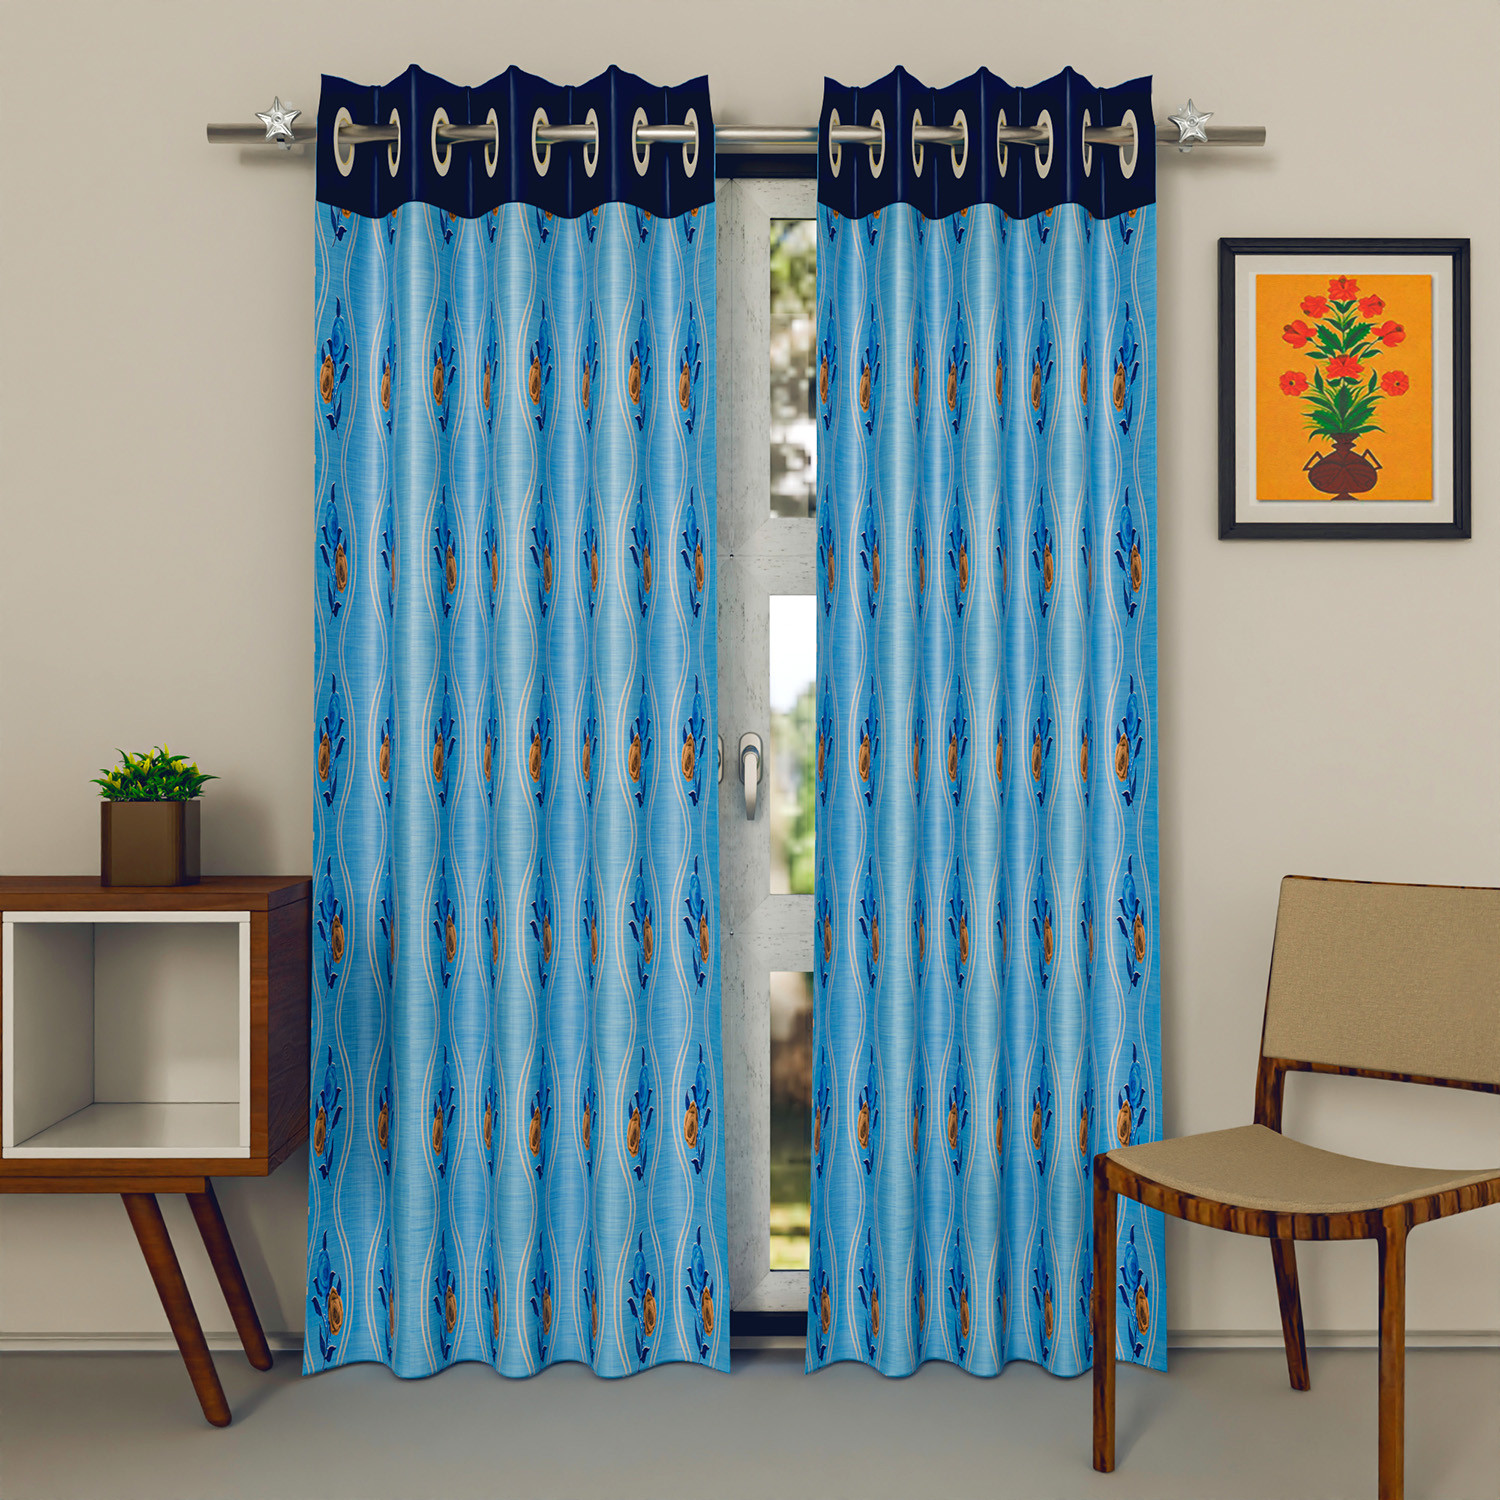 Kuber Industries Polyester Decorative 7 Feet Door Curtain | Rose Print Blackout Drapes Curtain With 8 Eyelet For Home & Office (Sky Blue)